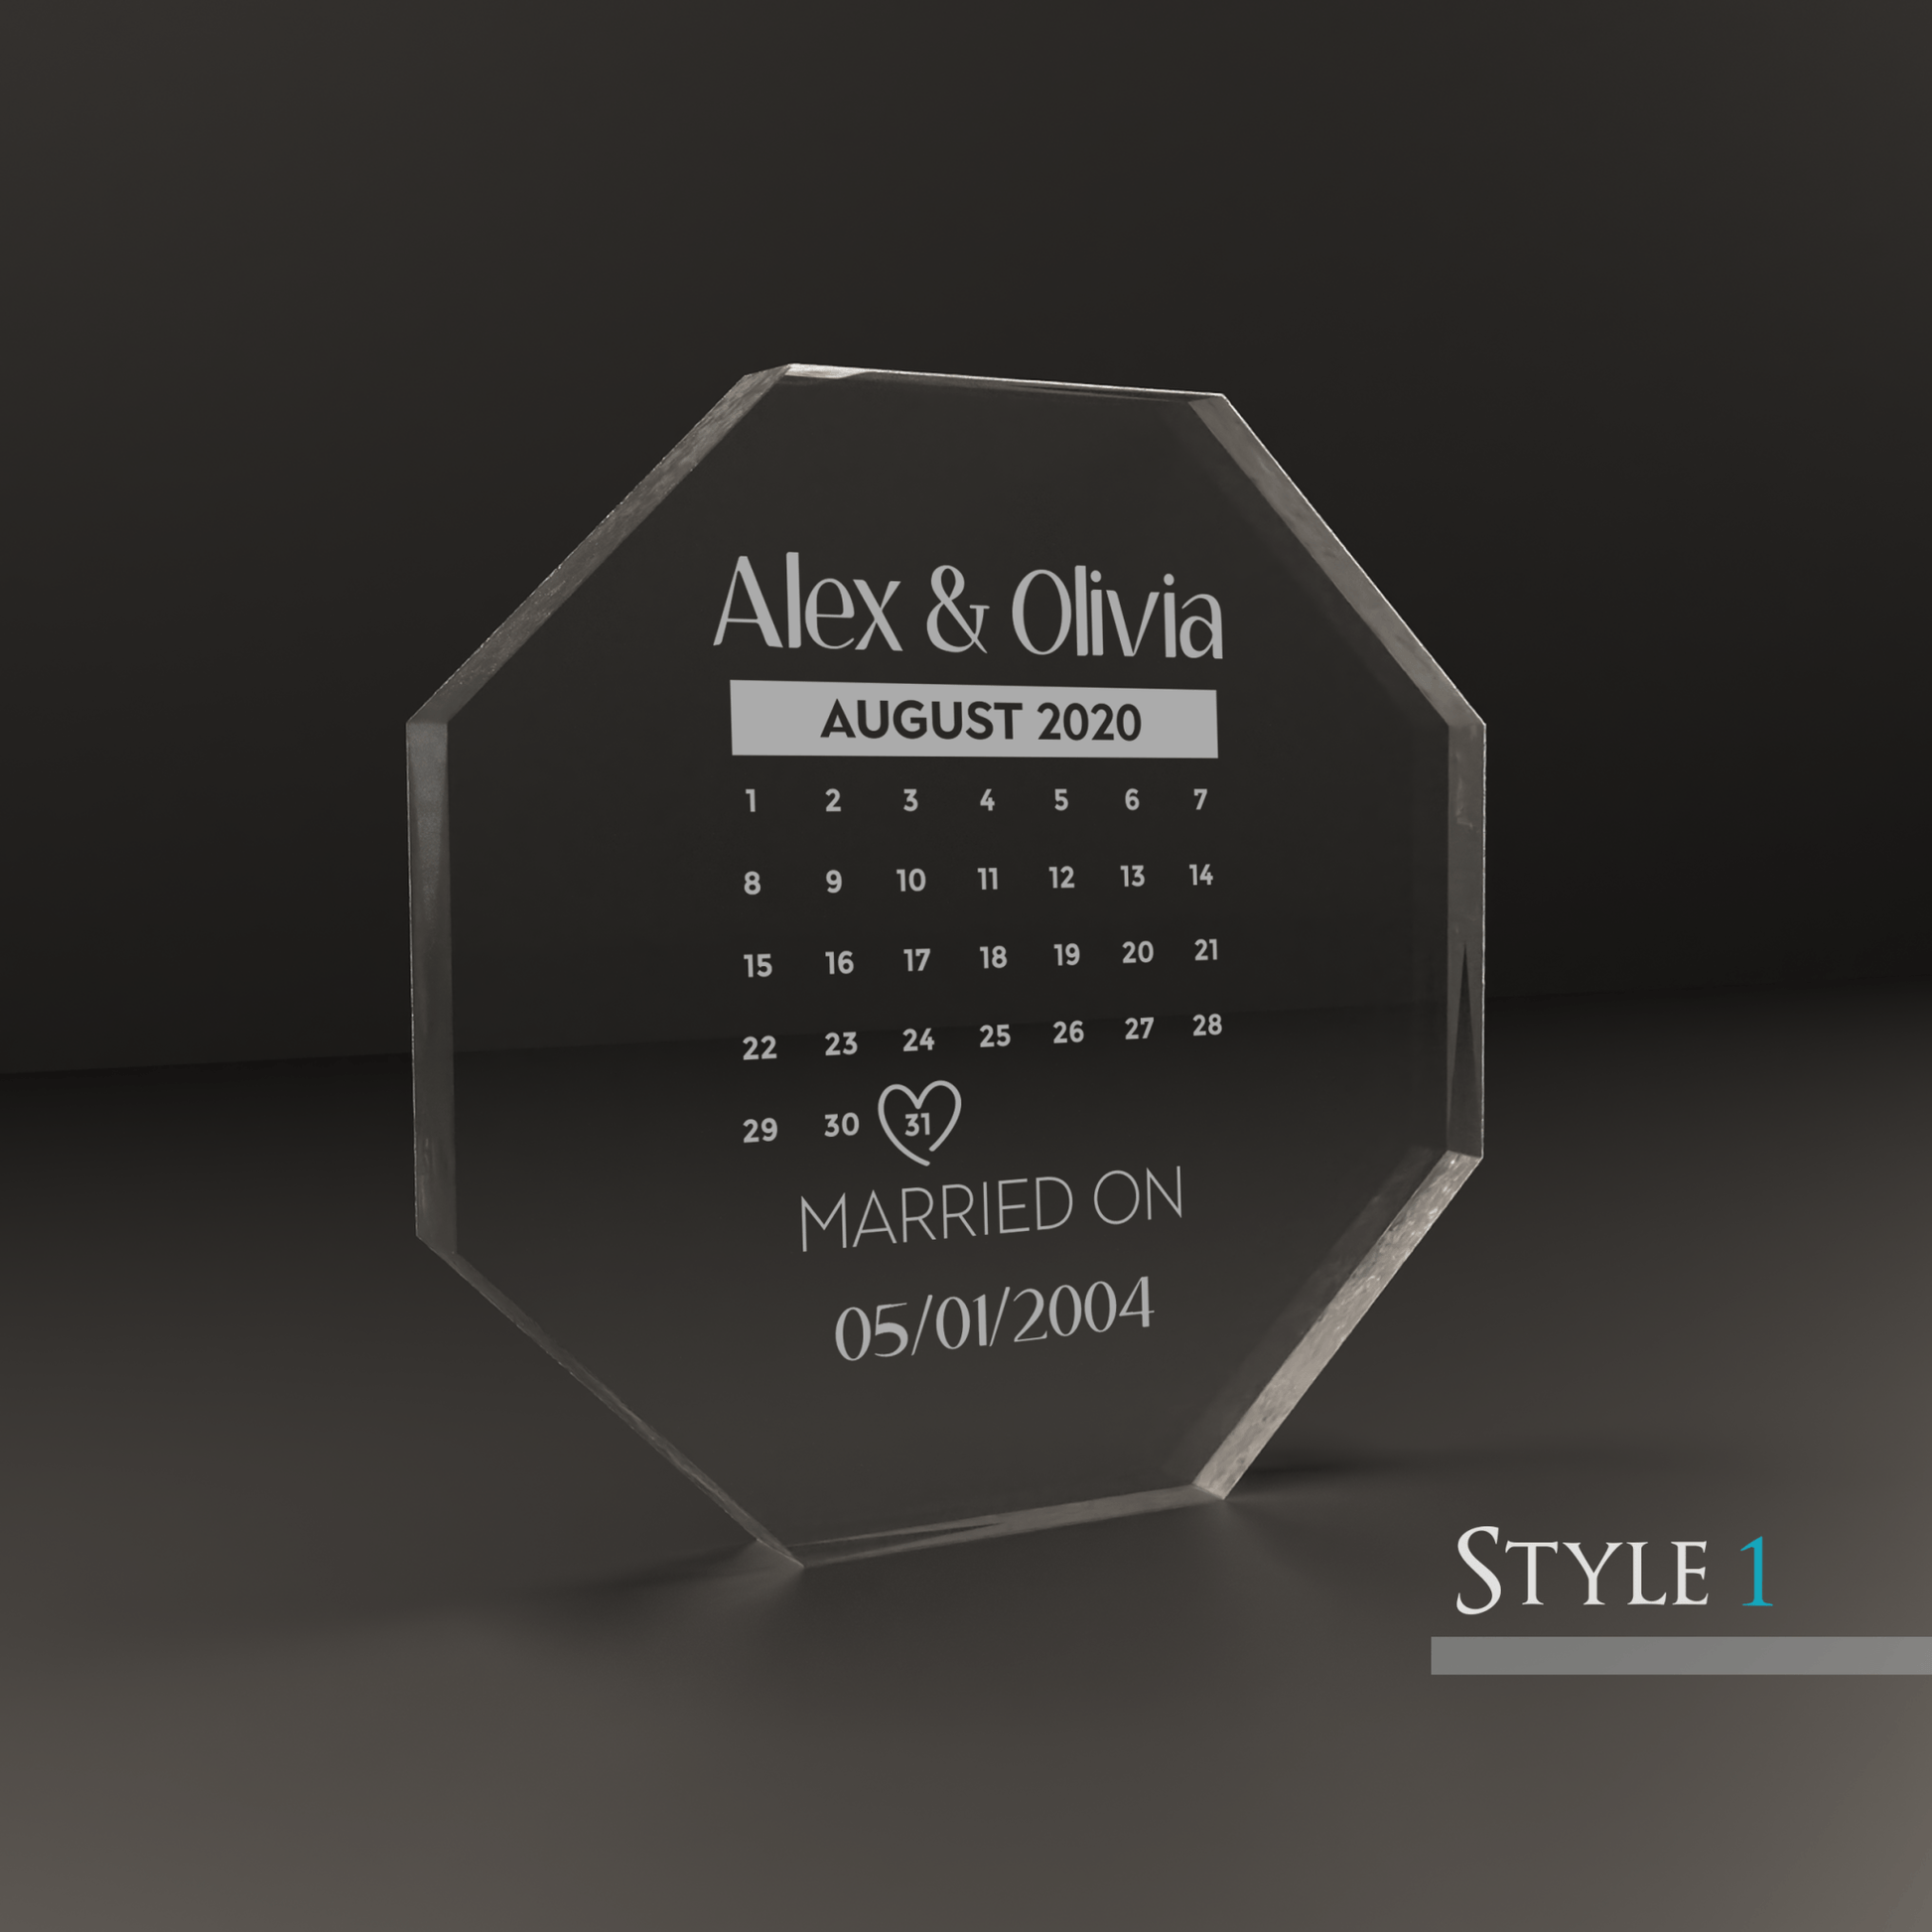 Personalised Engraved Octagon Glass Award Trophy - So Bespoke Gifts